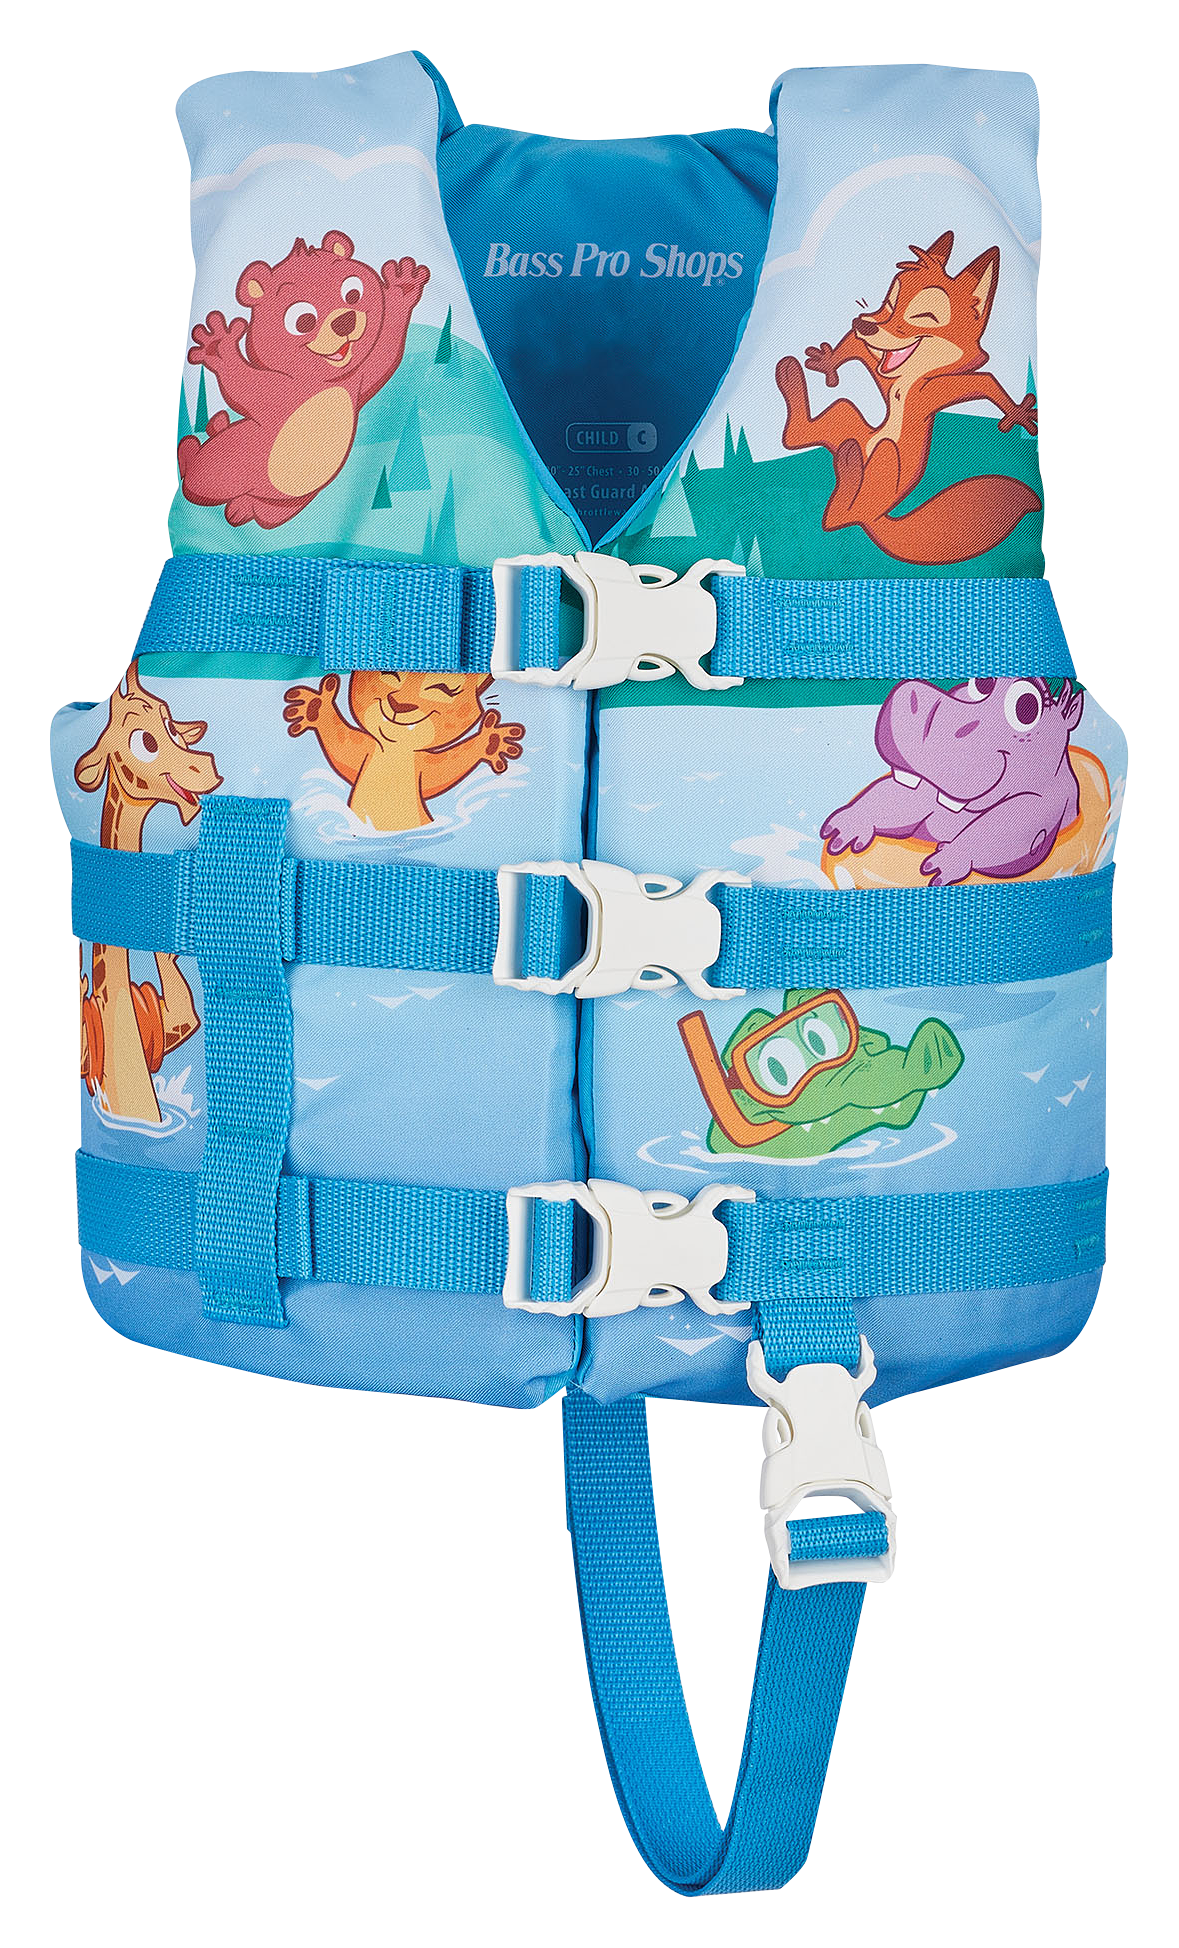 Bass Pro Shops Deluxe Swimming Hole Life Jacket for Kids